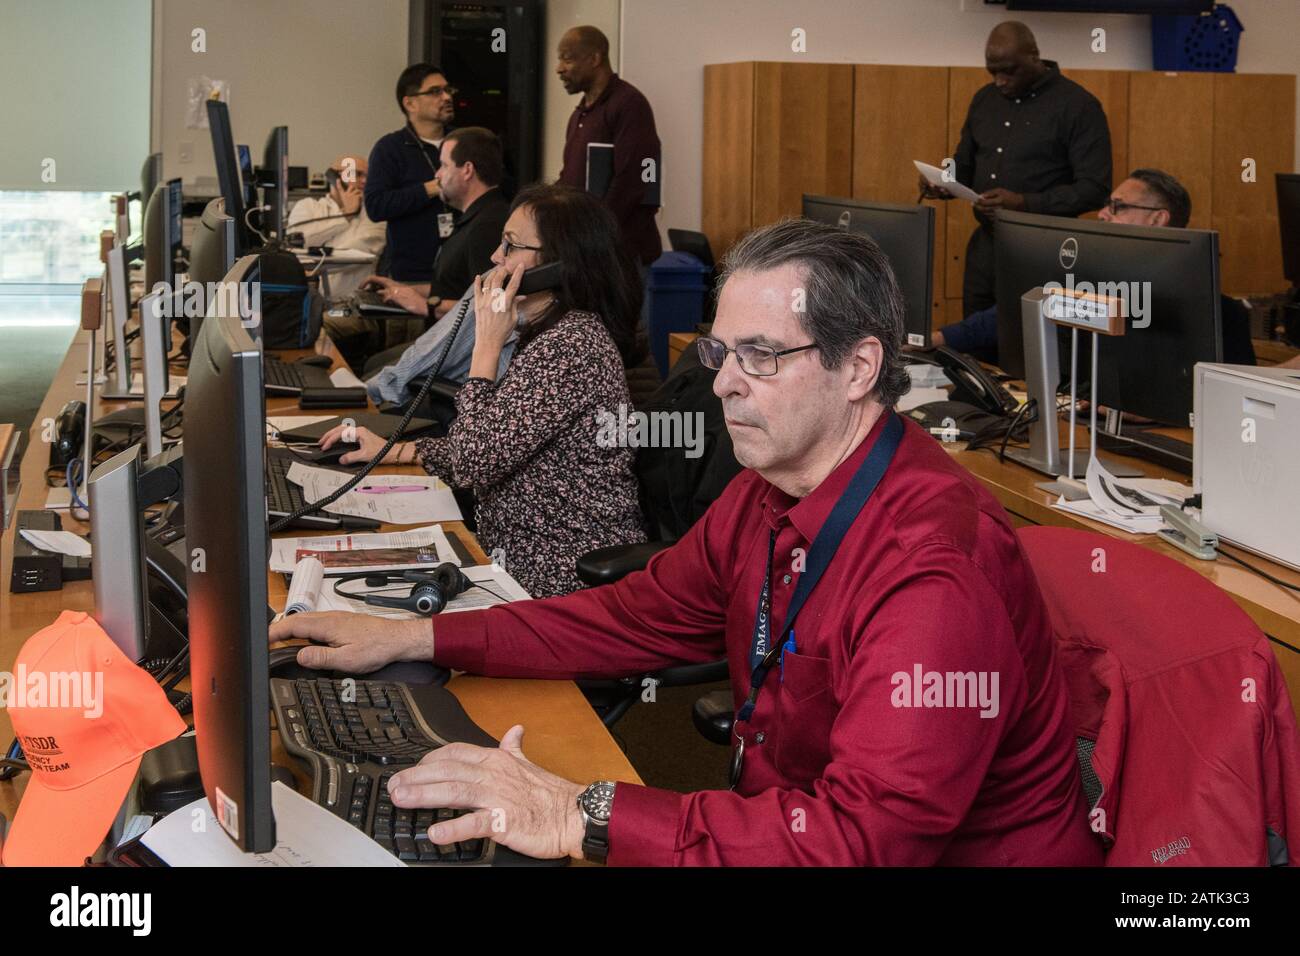 Atlanta, United States Of America. 03rd Feb, 2020. Atlanta, United States of America. 03 February, 2020. Staff at the Centers for Disease Control and Prevention Emergency Operations Center responding to the outbreak of the 2019 nCoV Novel Coronavirus at the CDC Headquarters February 3, 2020 in Atlanta, Georgia. The Novel Coronavirus 2019-nCoV which has caused an outbreak of respiratory illness first detected in Wuhan, China has now effected more than 17,000 people. Credit: CDC/Planetpix/Alamy Live News Credit: Planetpix/Alamy Live News Stock Photo